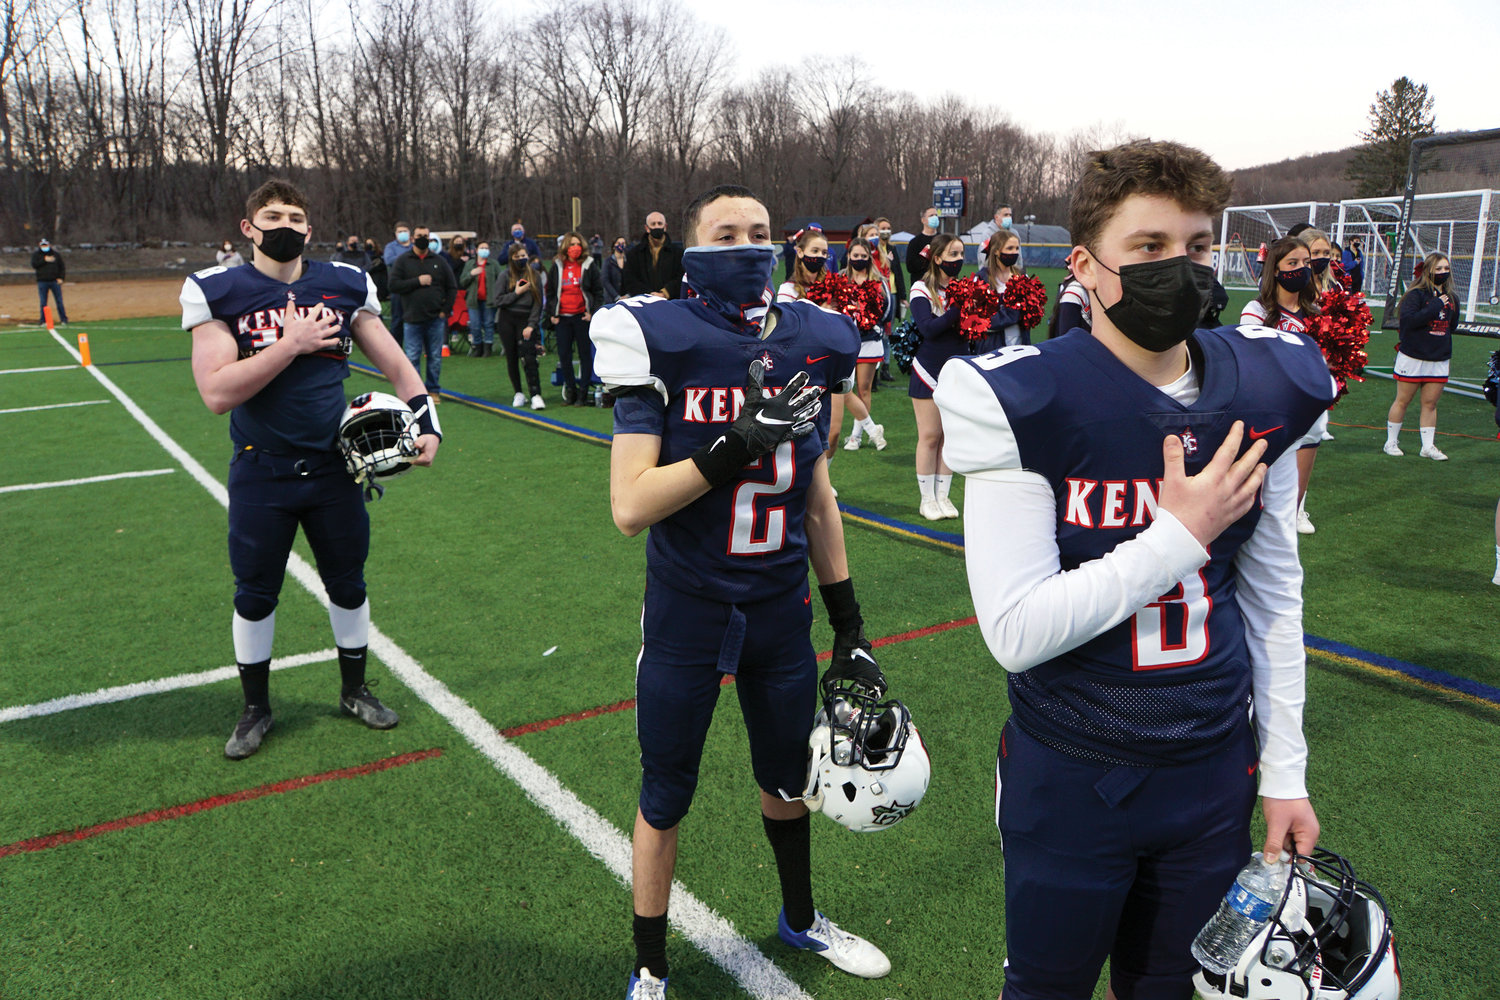 Bobby Piesco, Francisco Rivera and Carmine Calandrello stand for the National Anthem before John F. Kennedy Catholic Preparatory School and St. Dominic High School kicked off the football season in Somers March 12.